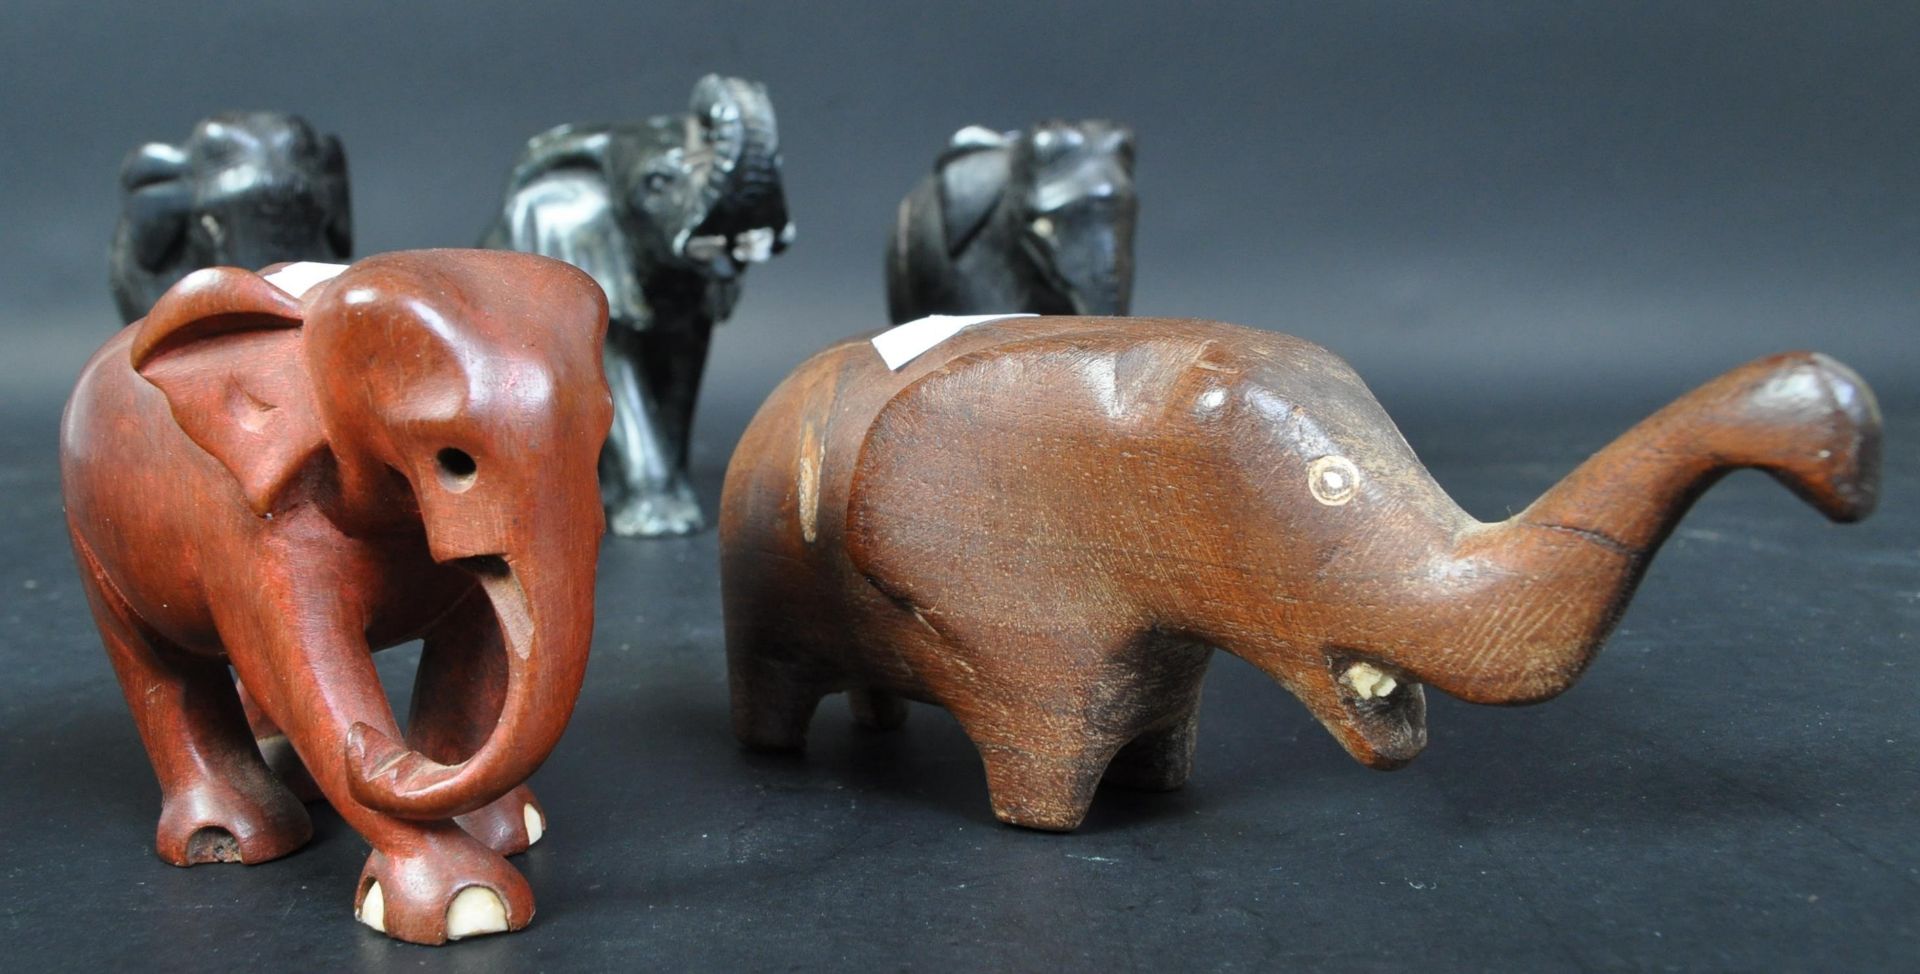 COLLECTION OF FIVE WOODEN ELEPHANT STATUES - Image 5 of 5